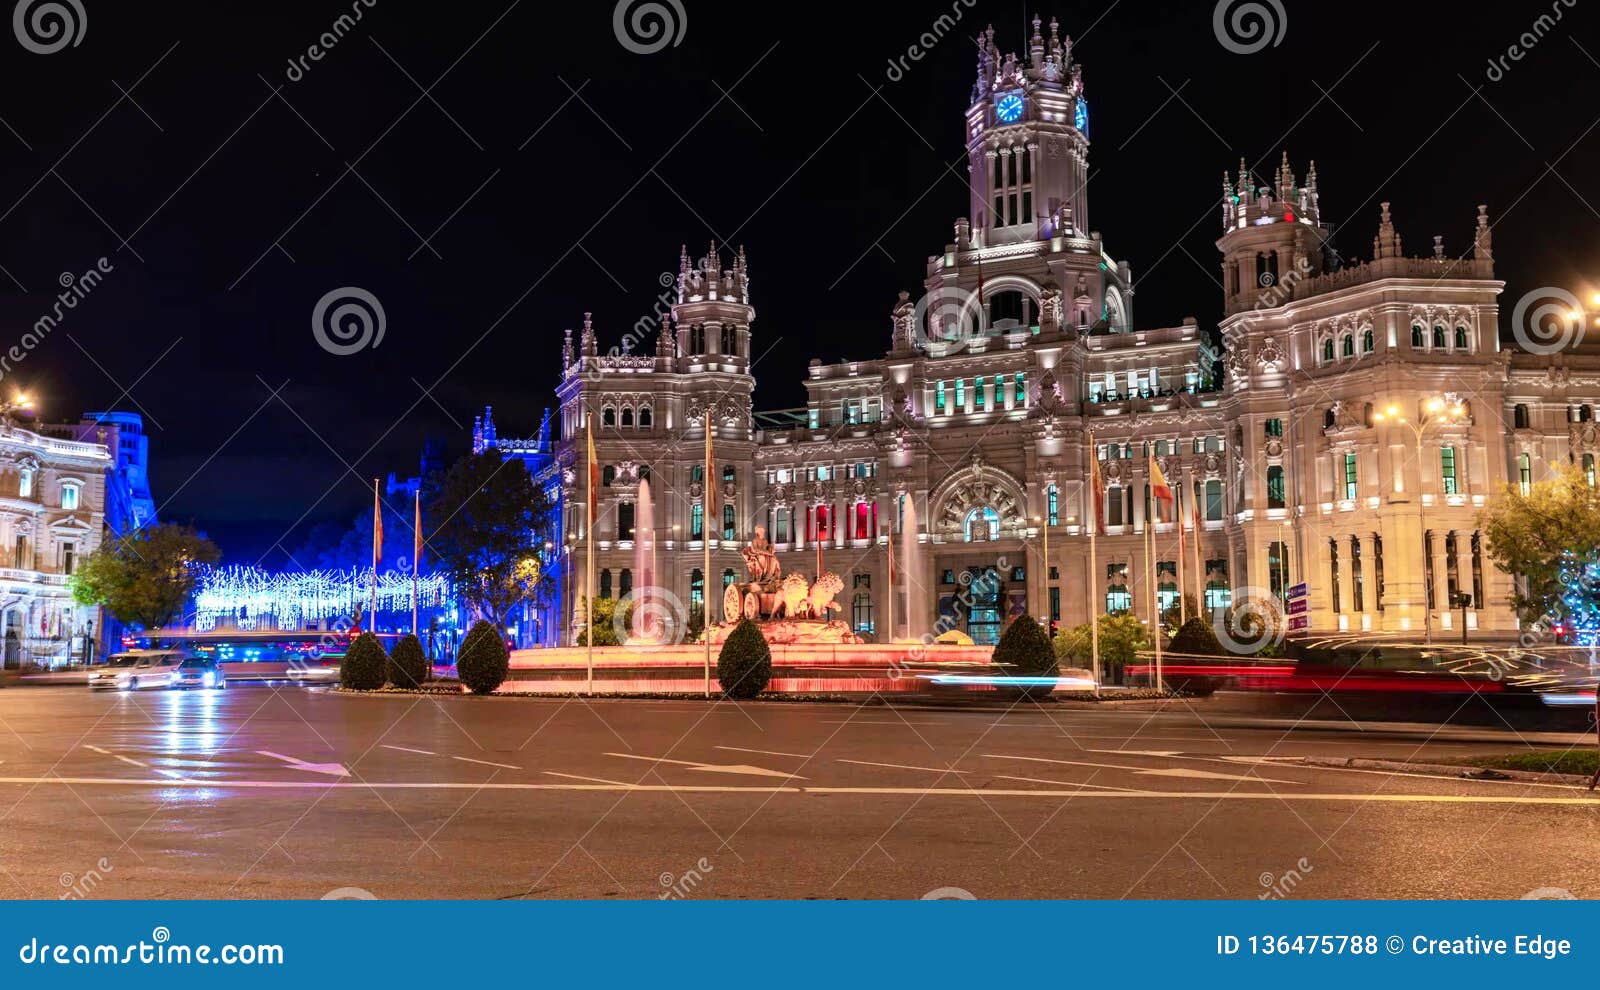 Madrid A Natale.Christmas Decorations And Lights In Madrid By Night Stock Photo Image Of Downtown Famous 136475788